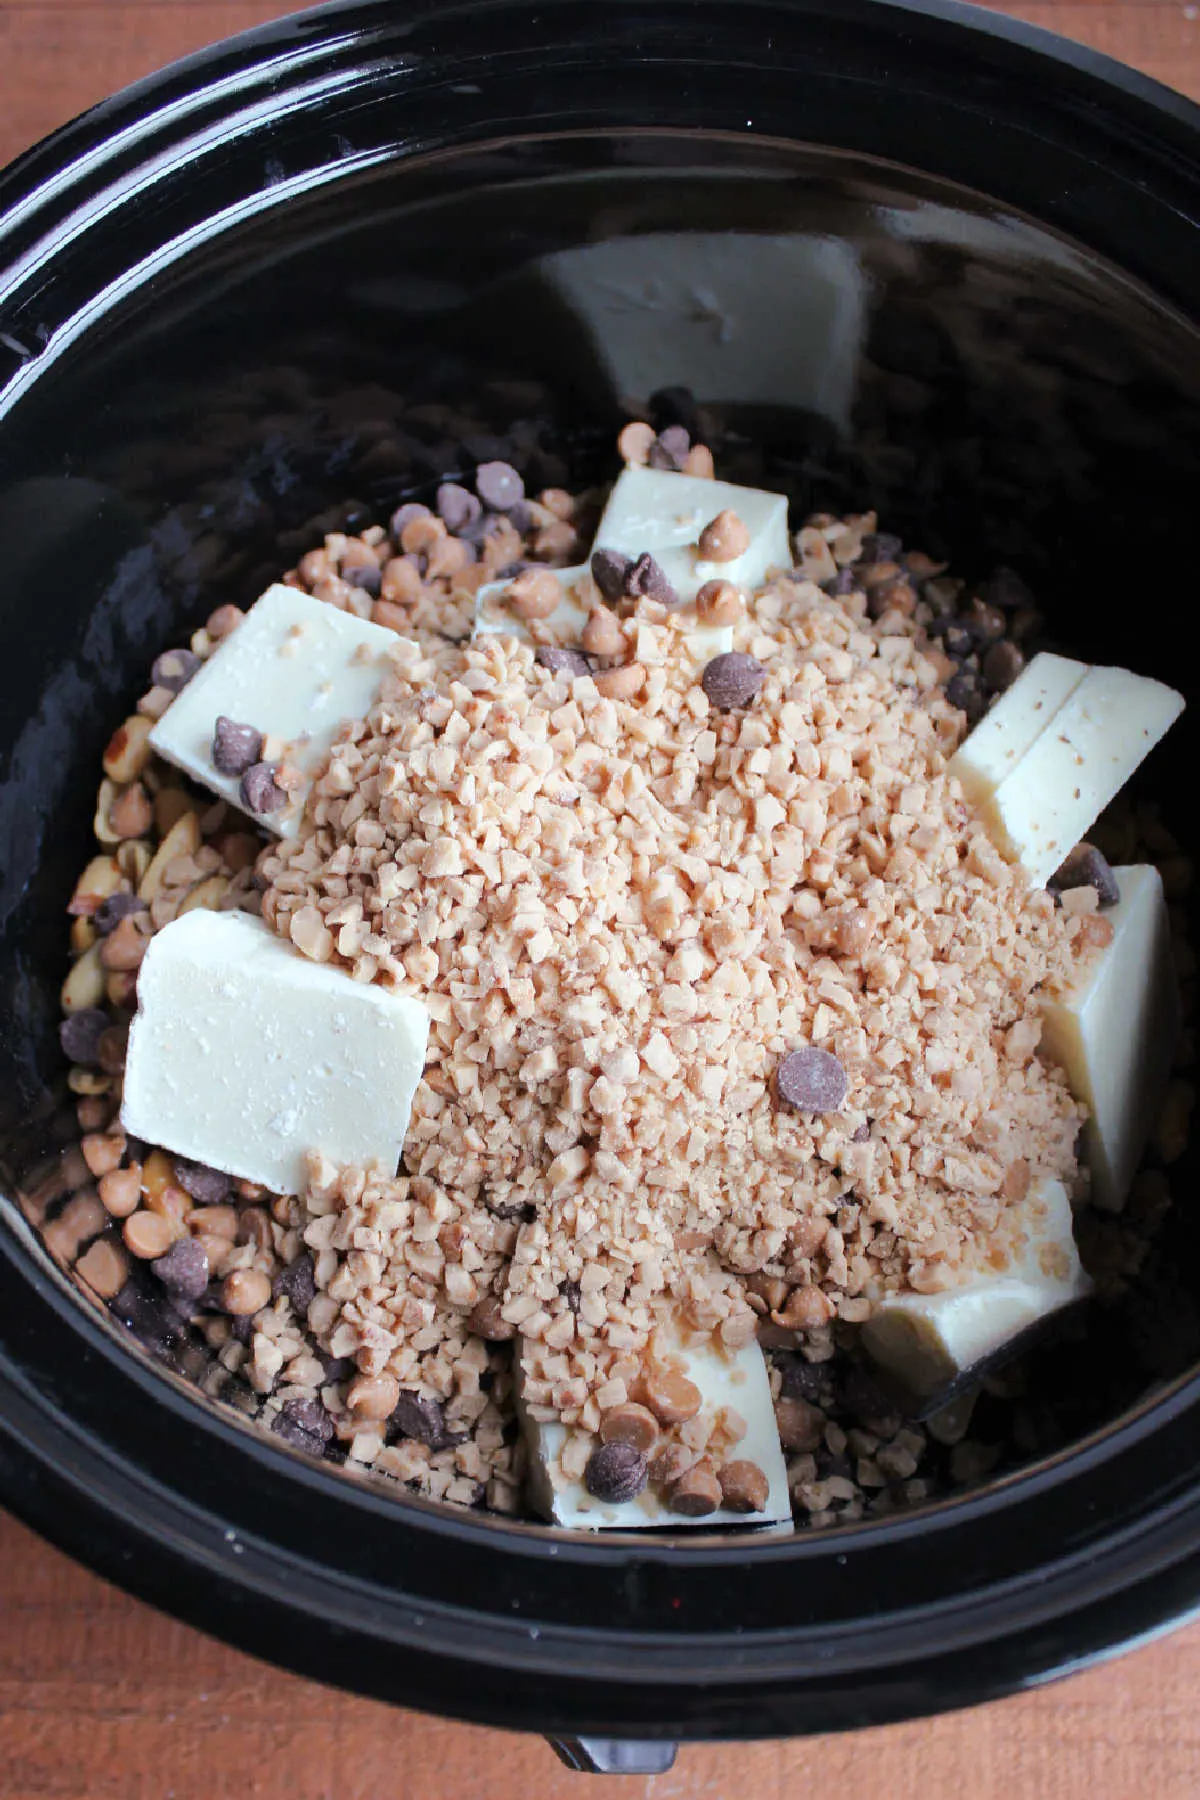 Slow cooker filled with peanuts, almond bark, chocolate chips and toffee bits ready to cook.